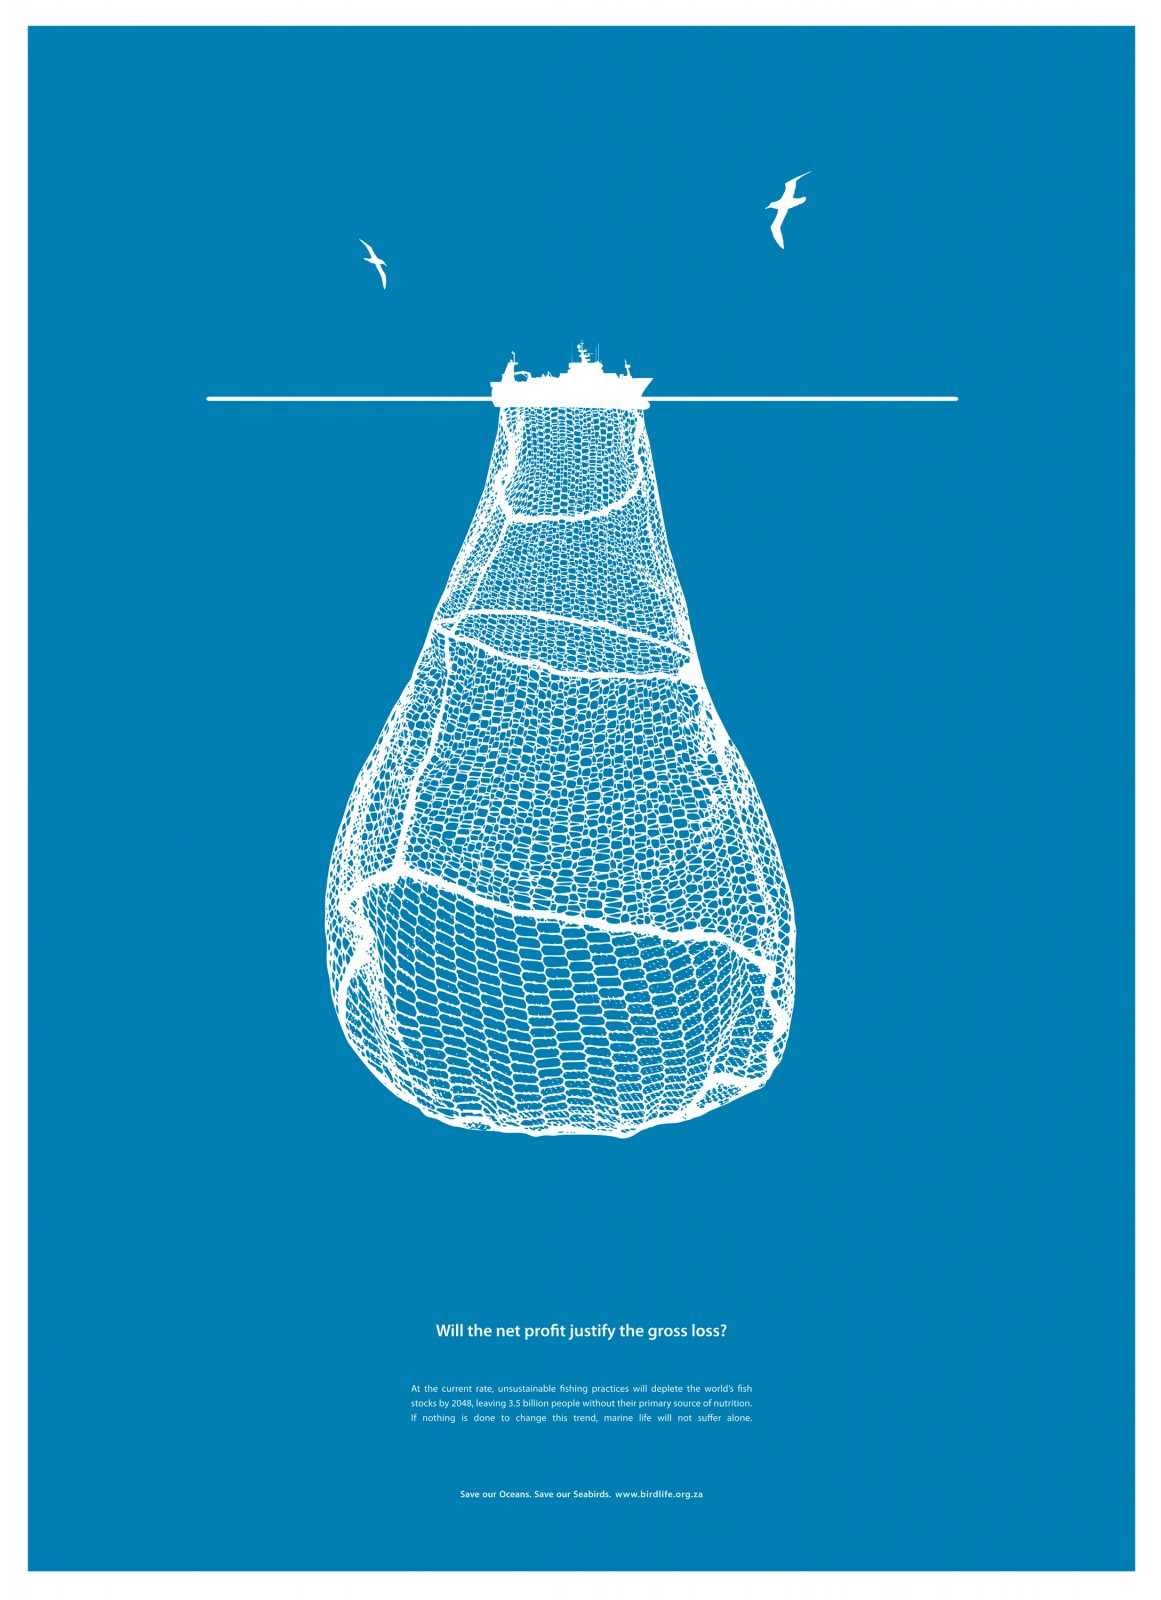 poster birds birdlife NGO south africa cape town simple clean blue Still craft contemporary Beautiful D&AD Awards